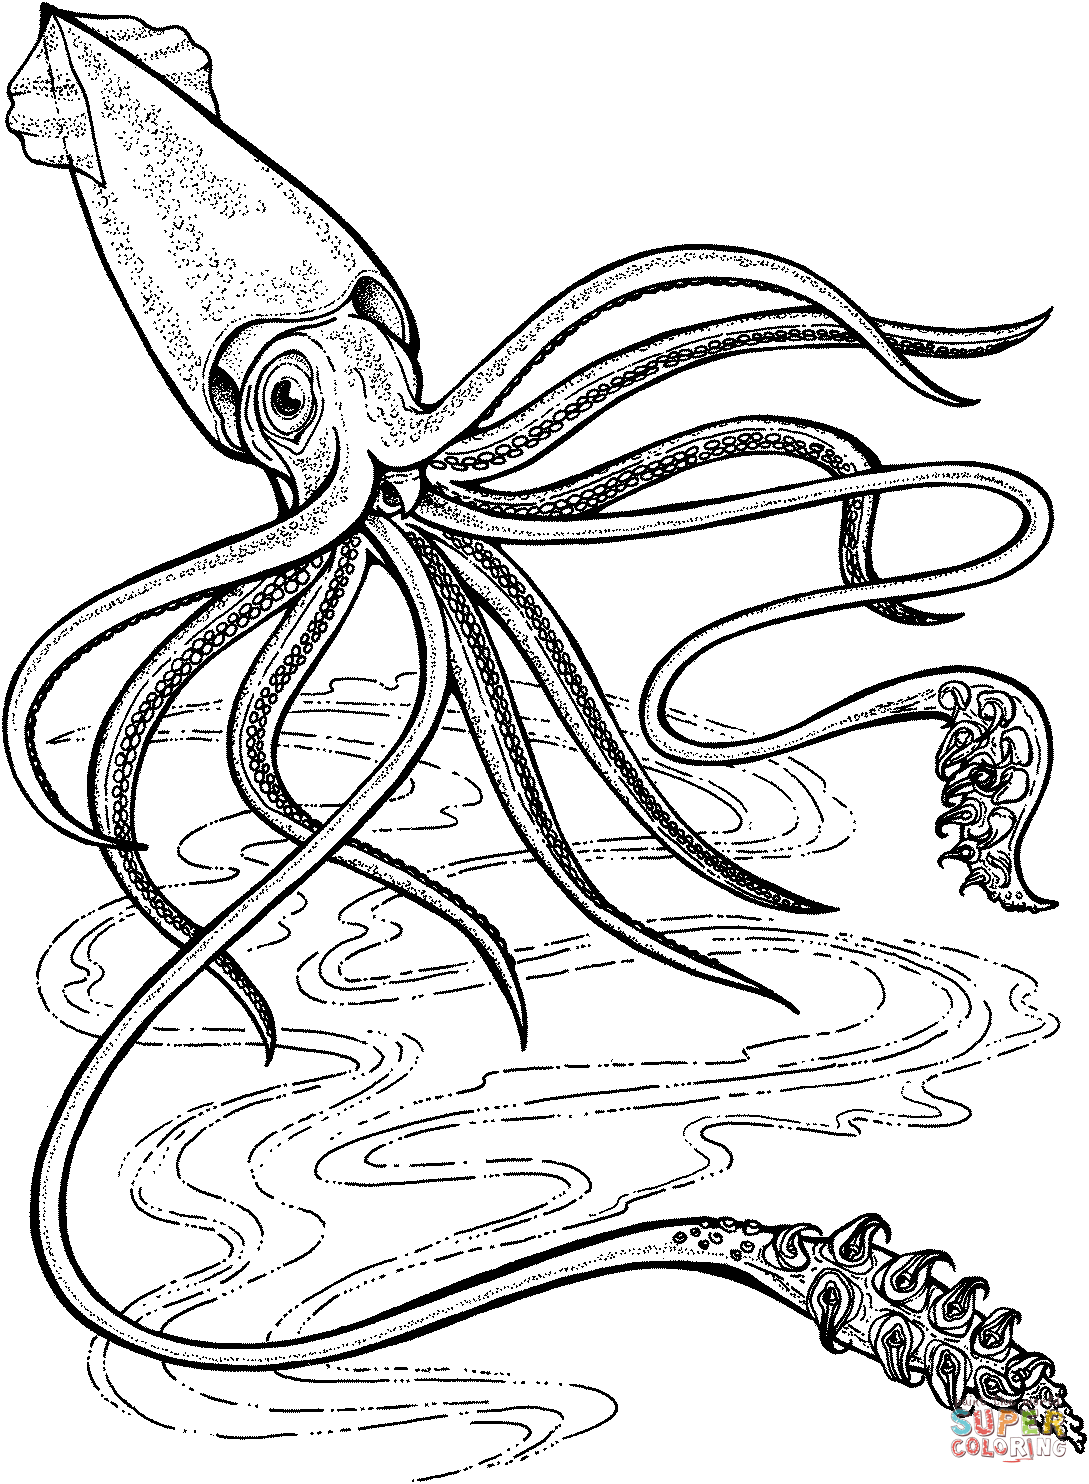 Squid coloring pages to download and print for free